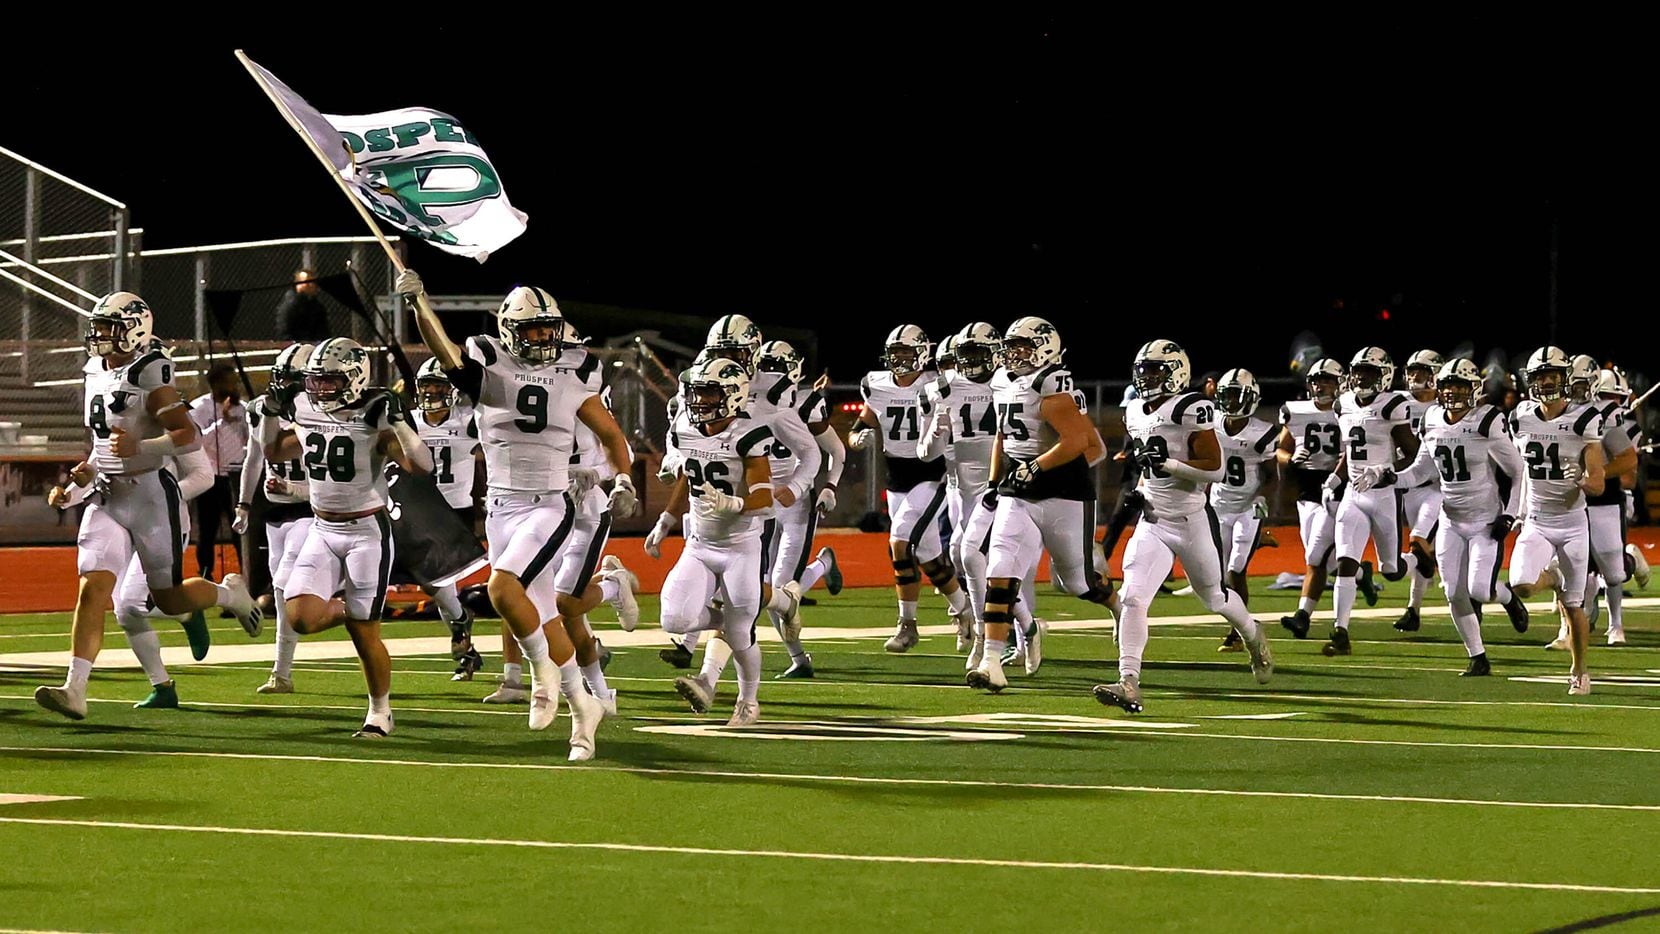 The Prosper Eagles in the field to face Flower Mound Marcus in a Class 6A Division II bi-district high school football game played at Marcus Marauders Stadium, Friday, November 12, 2021, in Flower Mound. (Steve Nurenberg/Special Contributor)